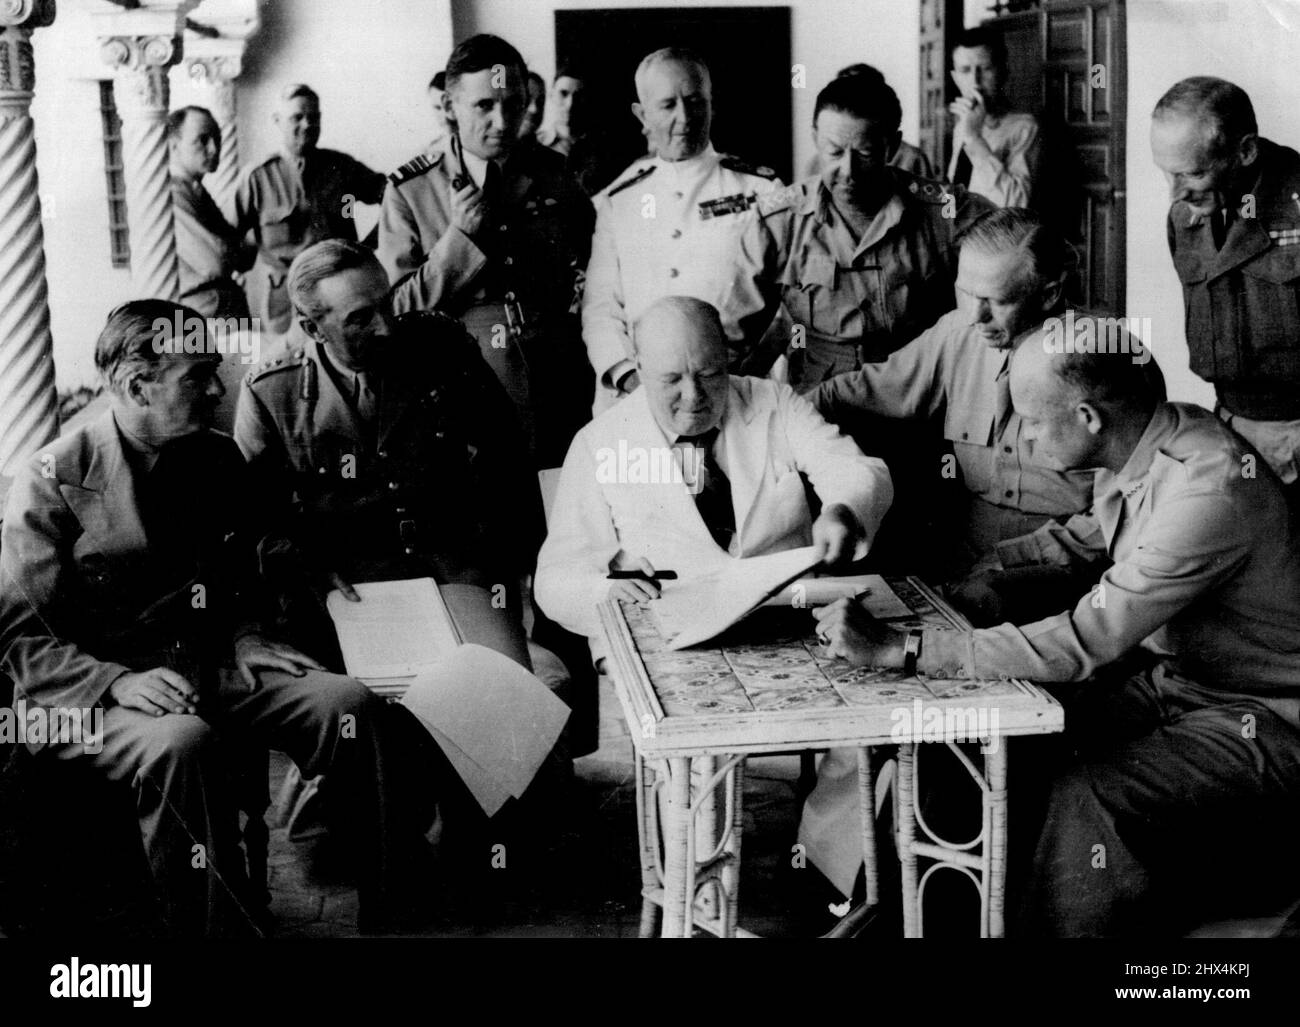 Churchill In North Africa At The Allied Planning Conference -- Left to right: Mr. Anthony Eden, Sir Alan Brooke, Air Chief Marshal Tedder, Admiral Sir Andrew Cunningham, General Alexander, General Marshall, U.S.A. General Eisenhower and General Montgomery: the Prime Minister is seen in the centre. Exclusive photograph taken at Allied Force Headquarters during the occasion of an Allied Planning Conference presided over by the Prime Minister with the Fighting Chiefs of Great Britain and U.S.A. June 1, 1943. (Photo by British Official Photograph). Stock Photo